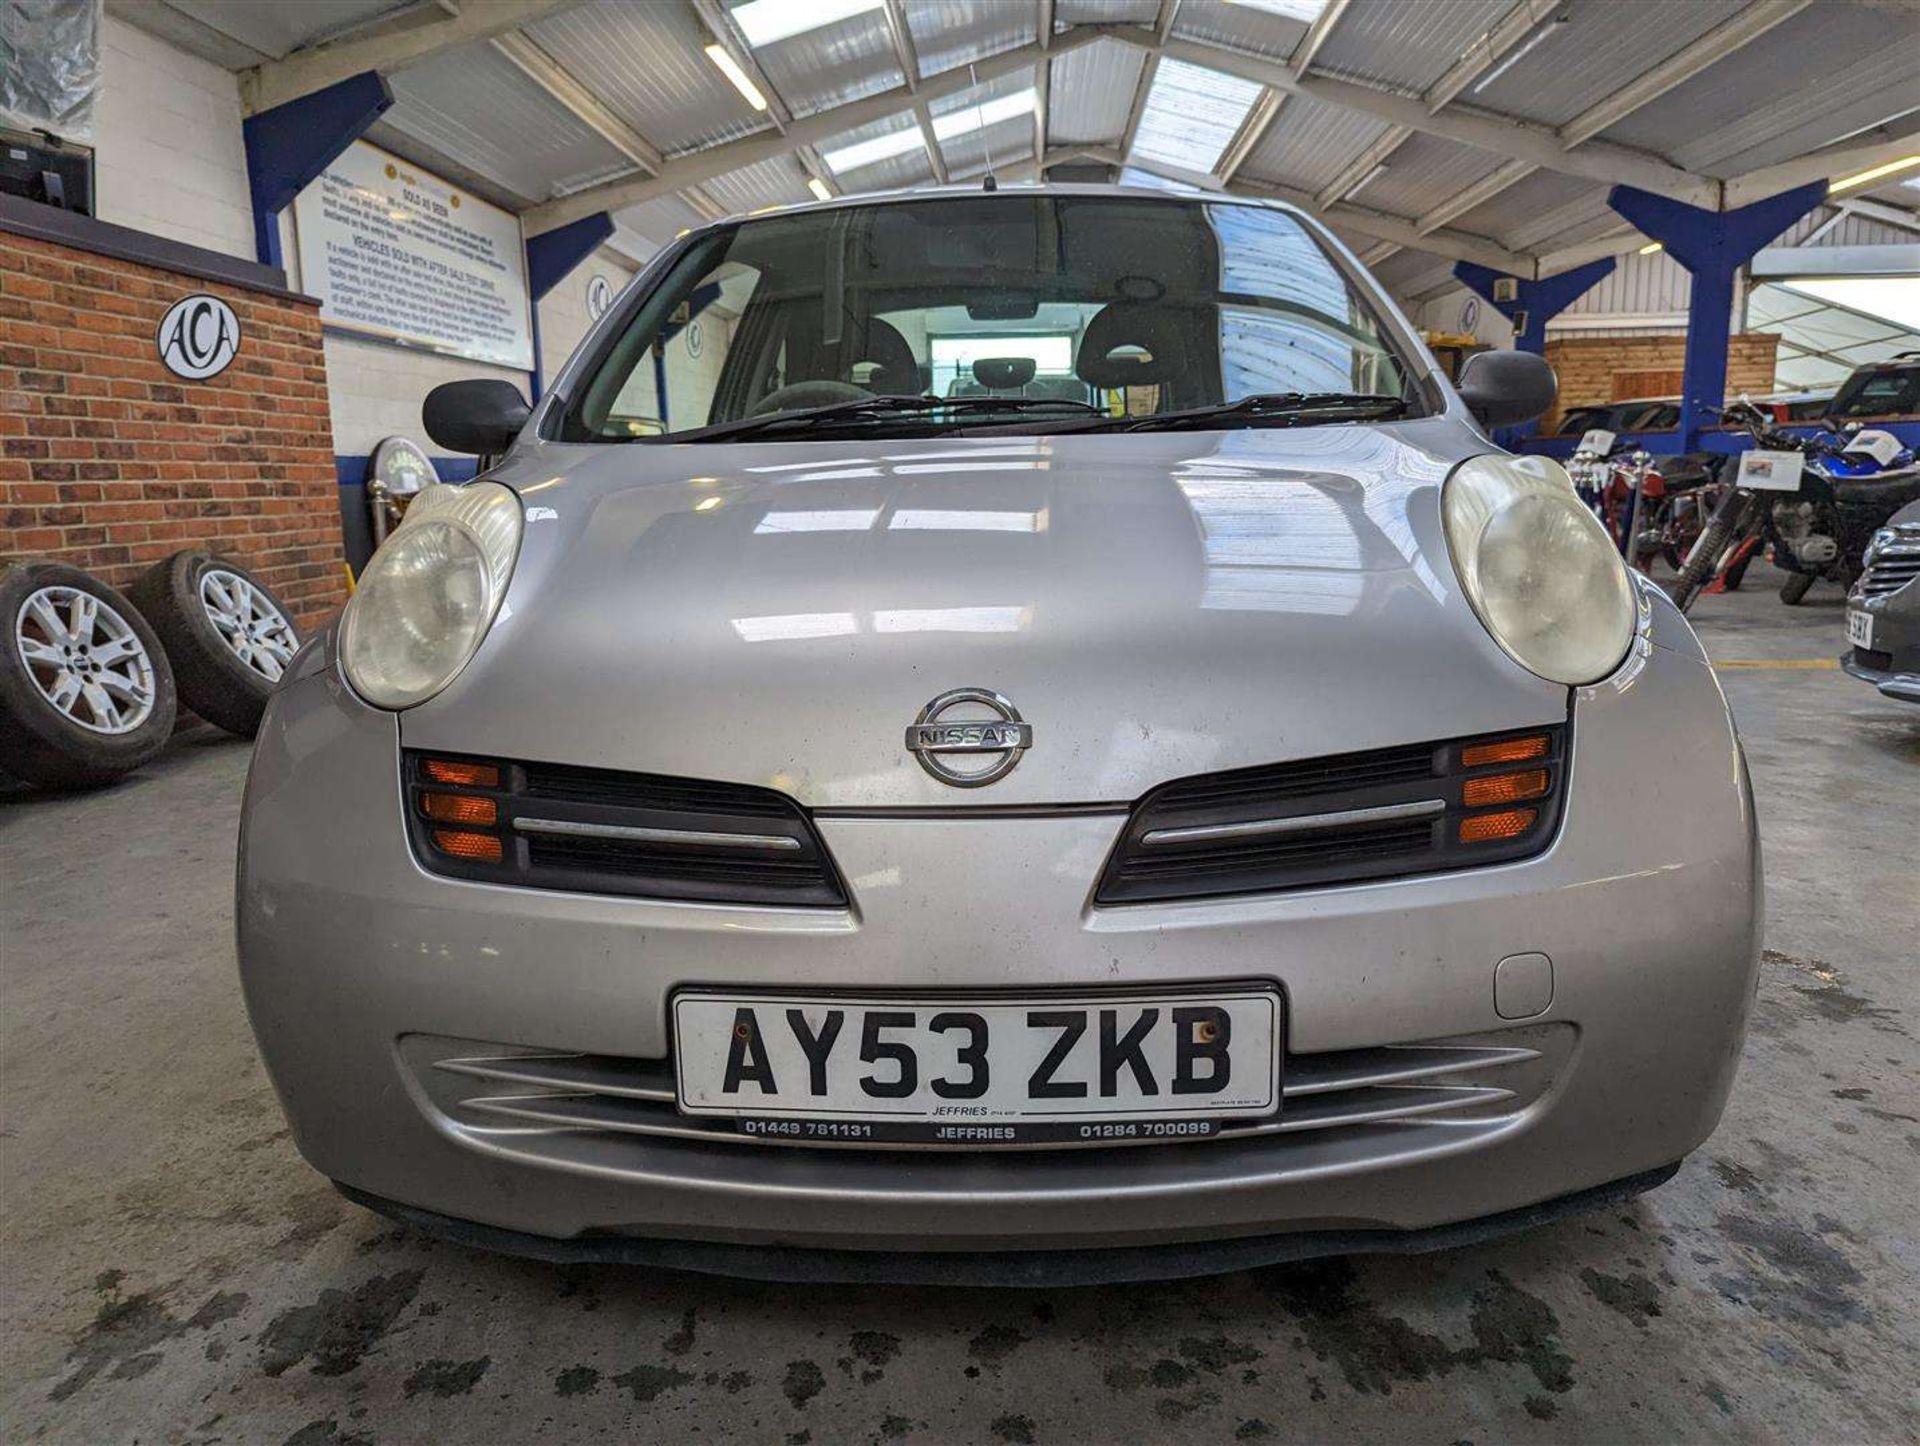 2003 NISSAN MICRA S - Image 18 of 18